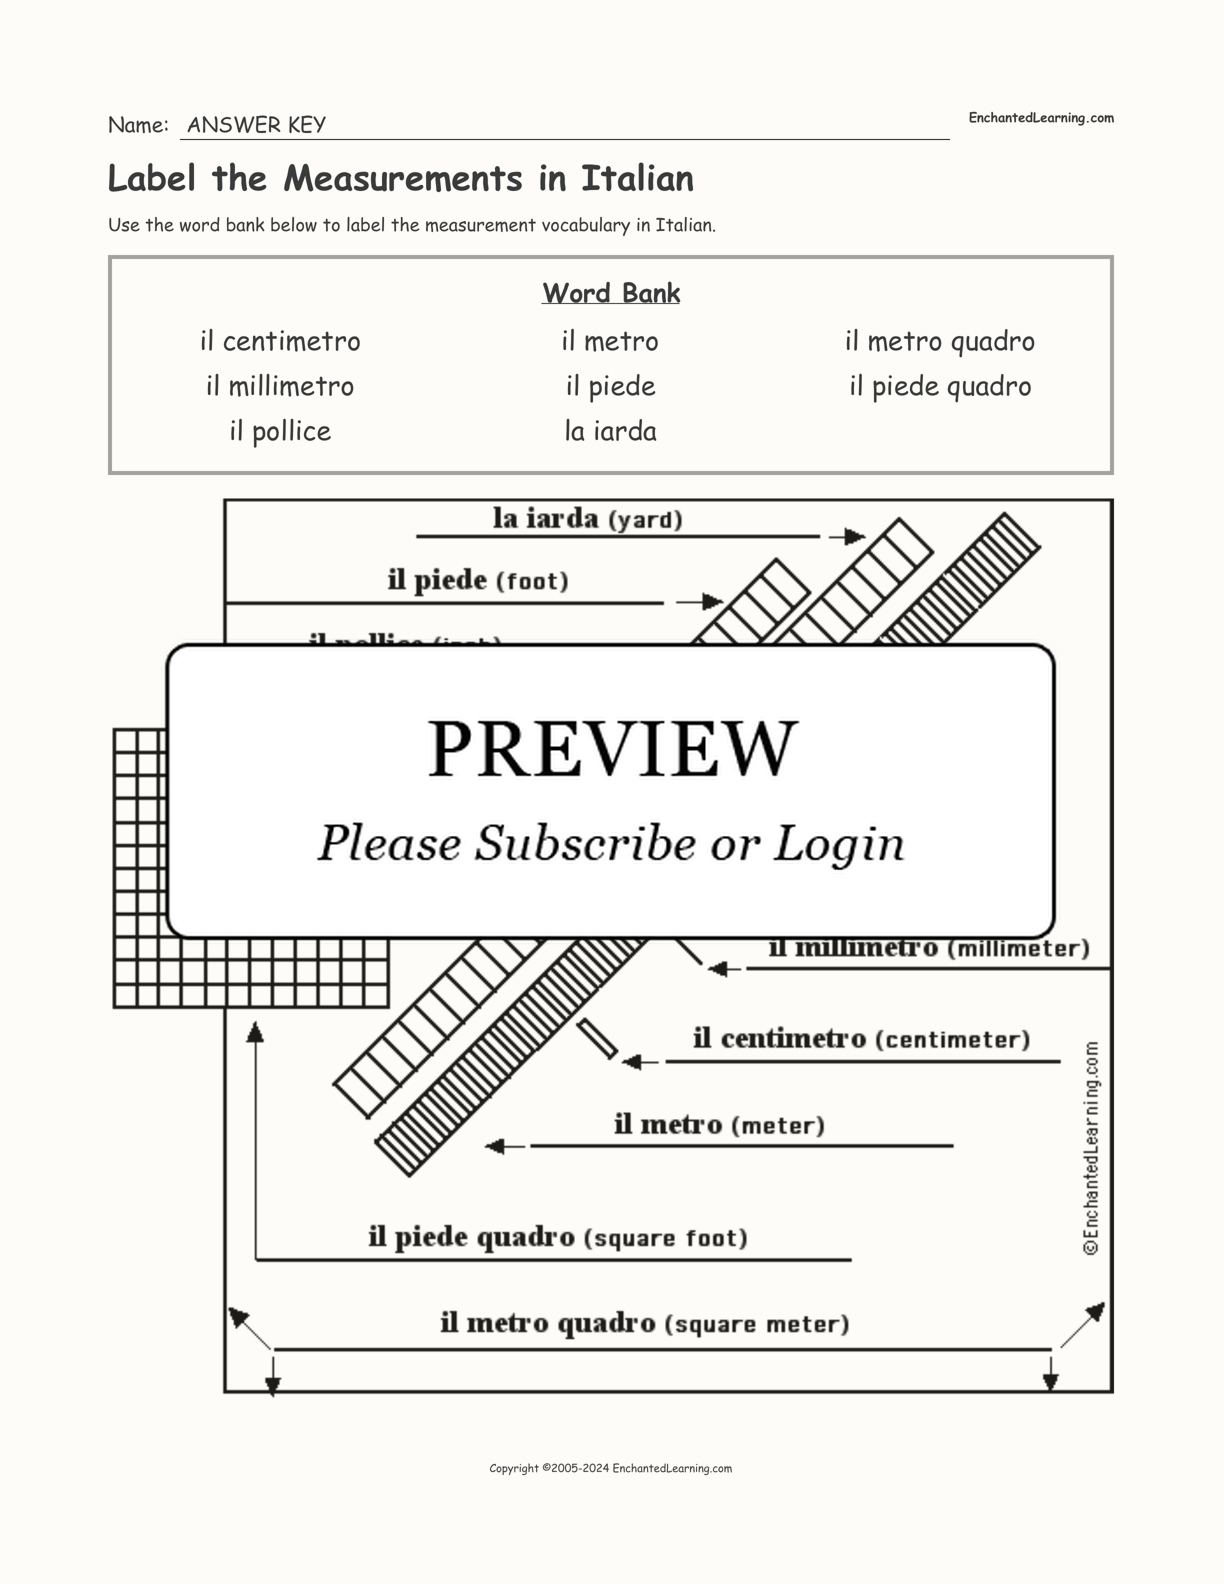 Label the Measurements in Italian interactive worksheet page 2